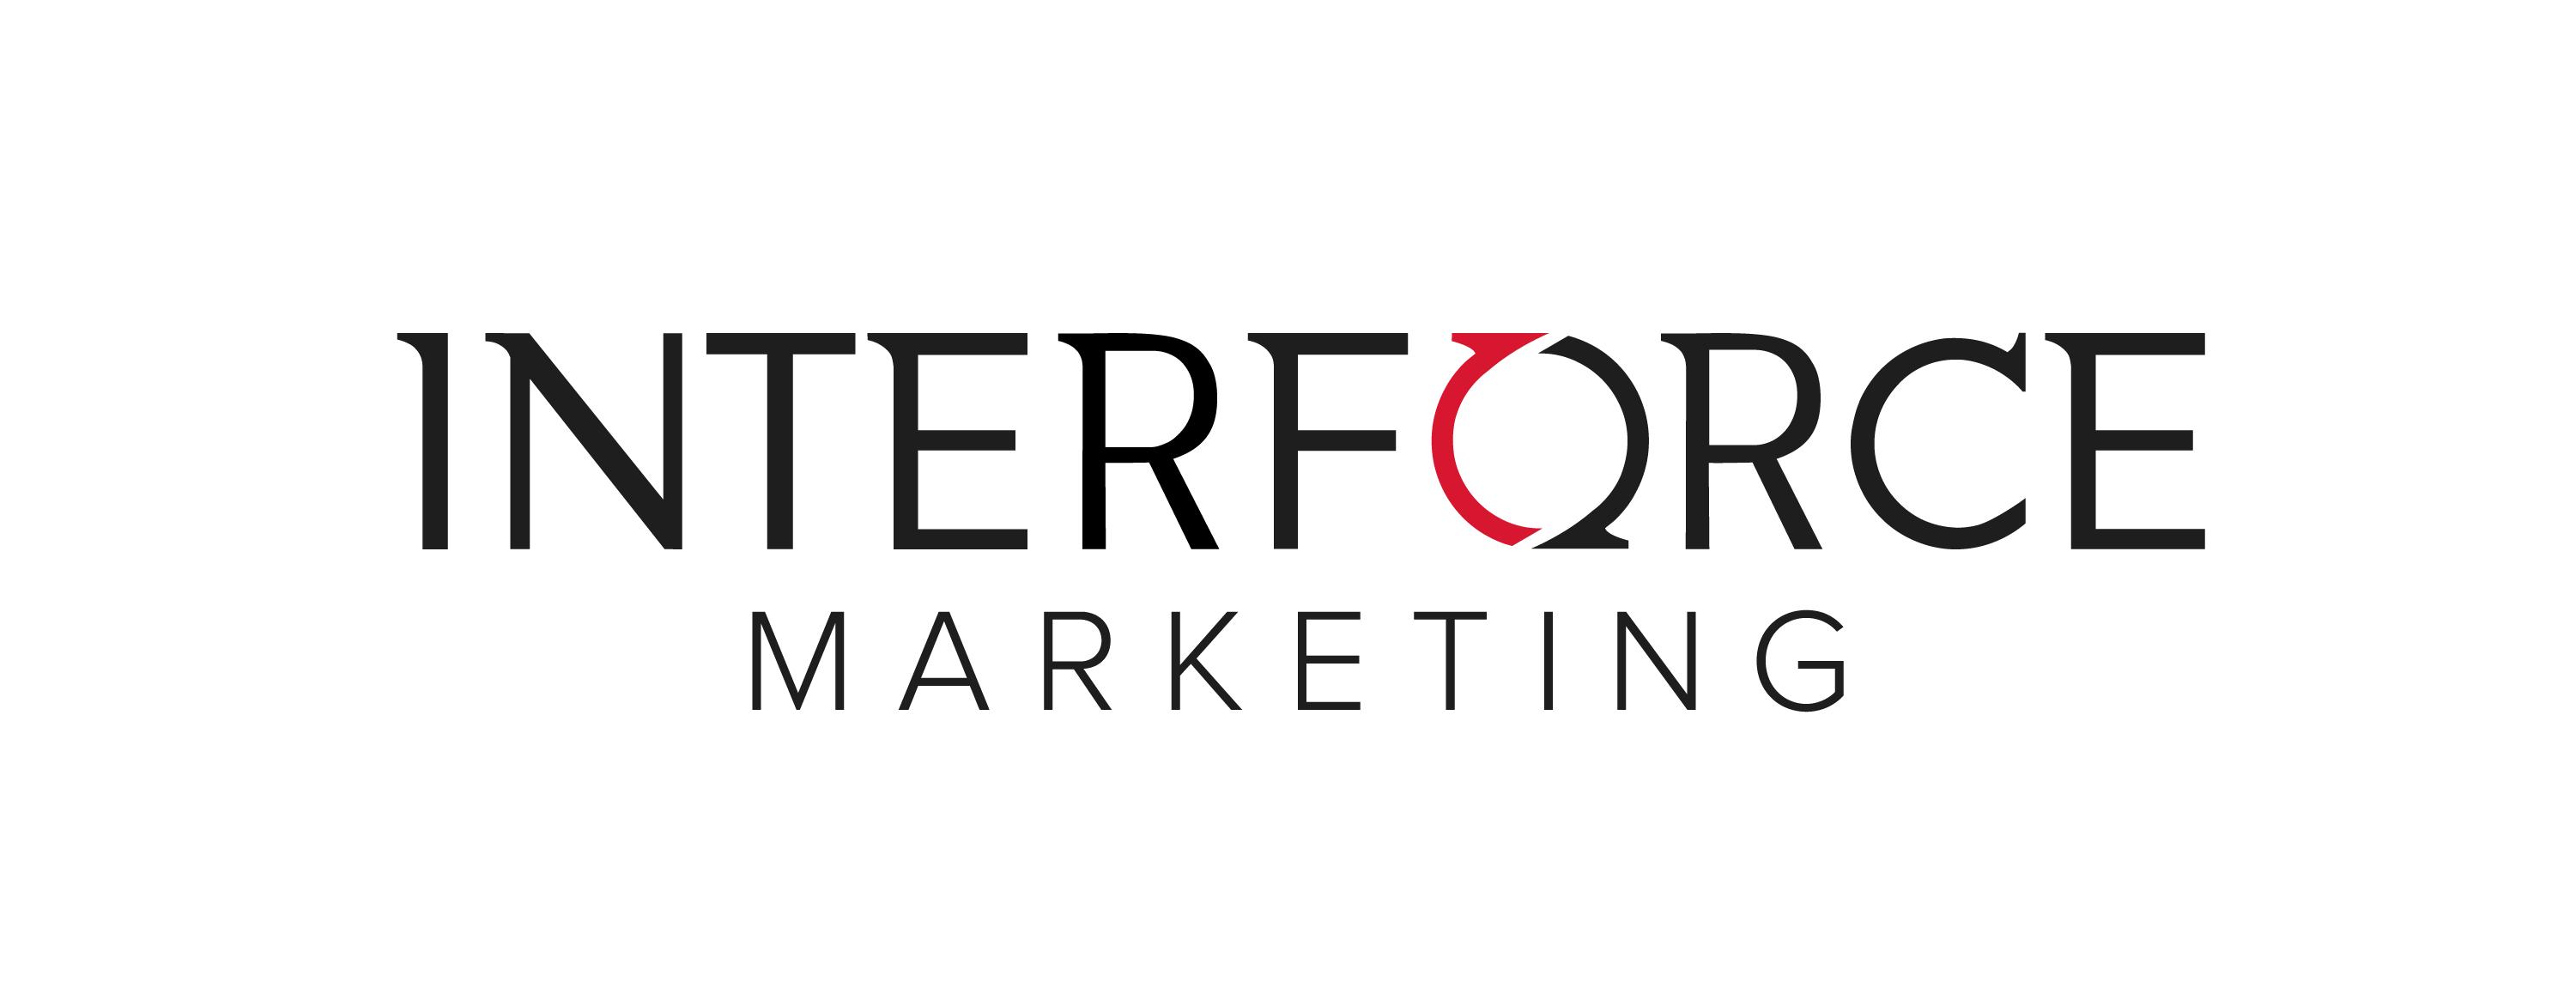 Interforce Marketing profile on Qualified.One